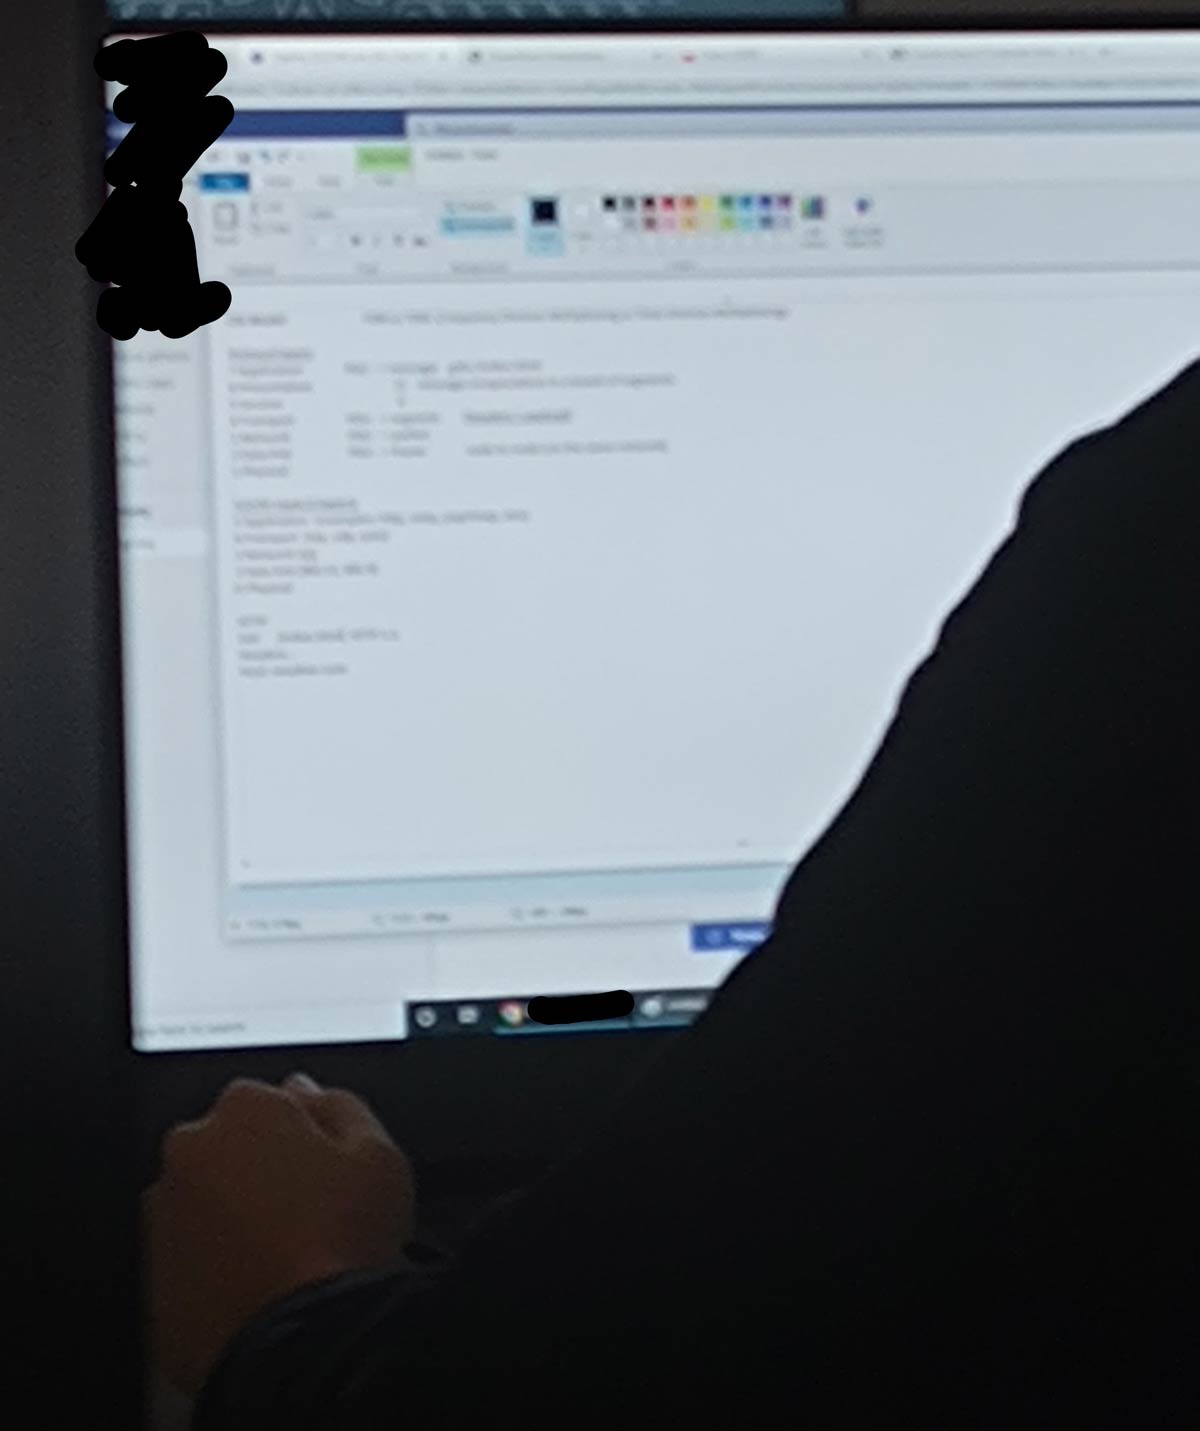 IT classes, the guy in front of me is taking notes in Paint.exe